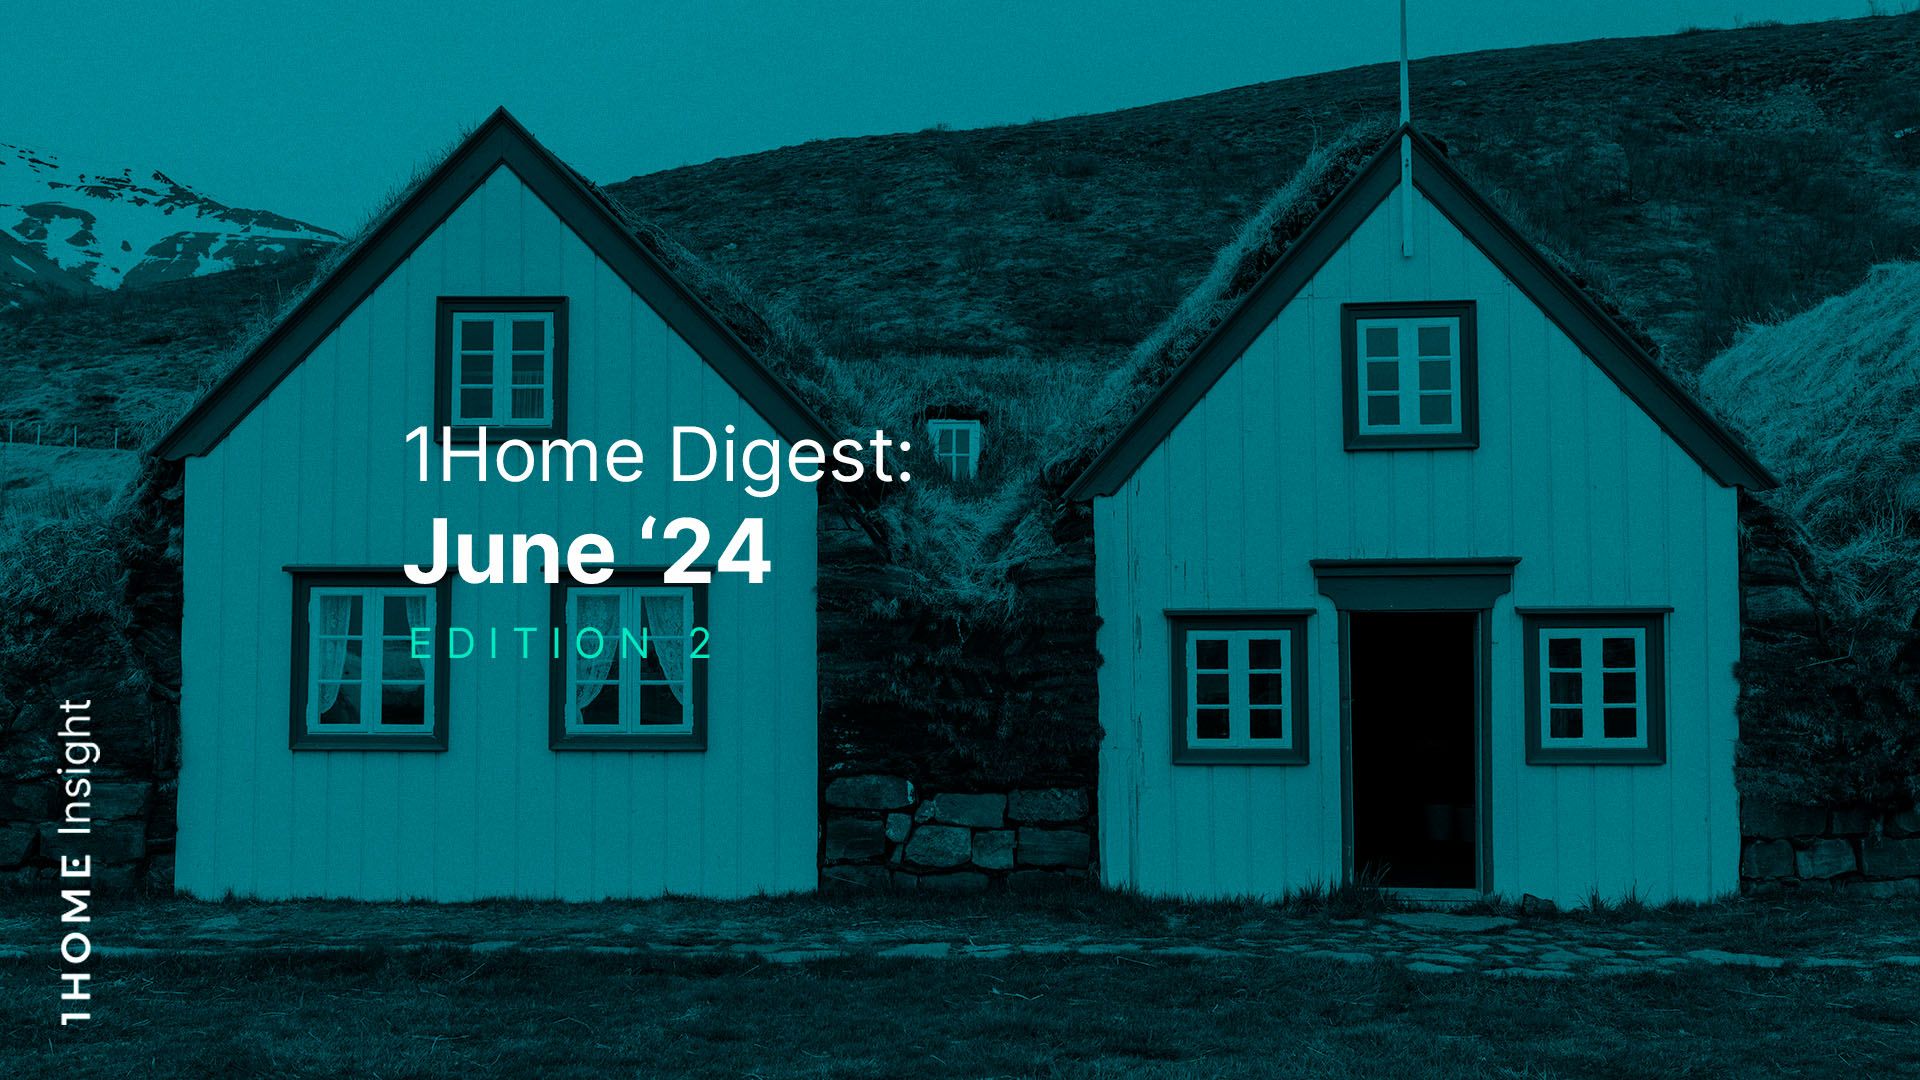 1Home Digest: June '24 Edition 2